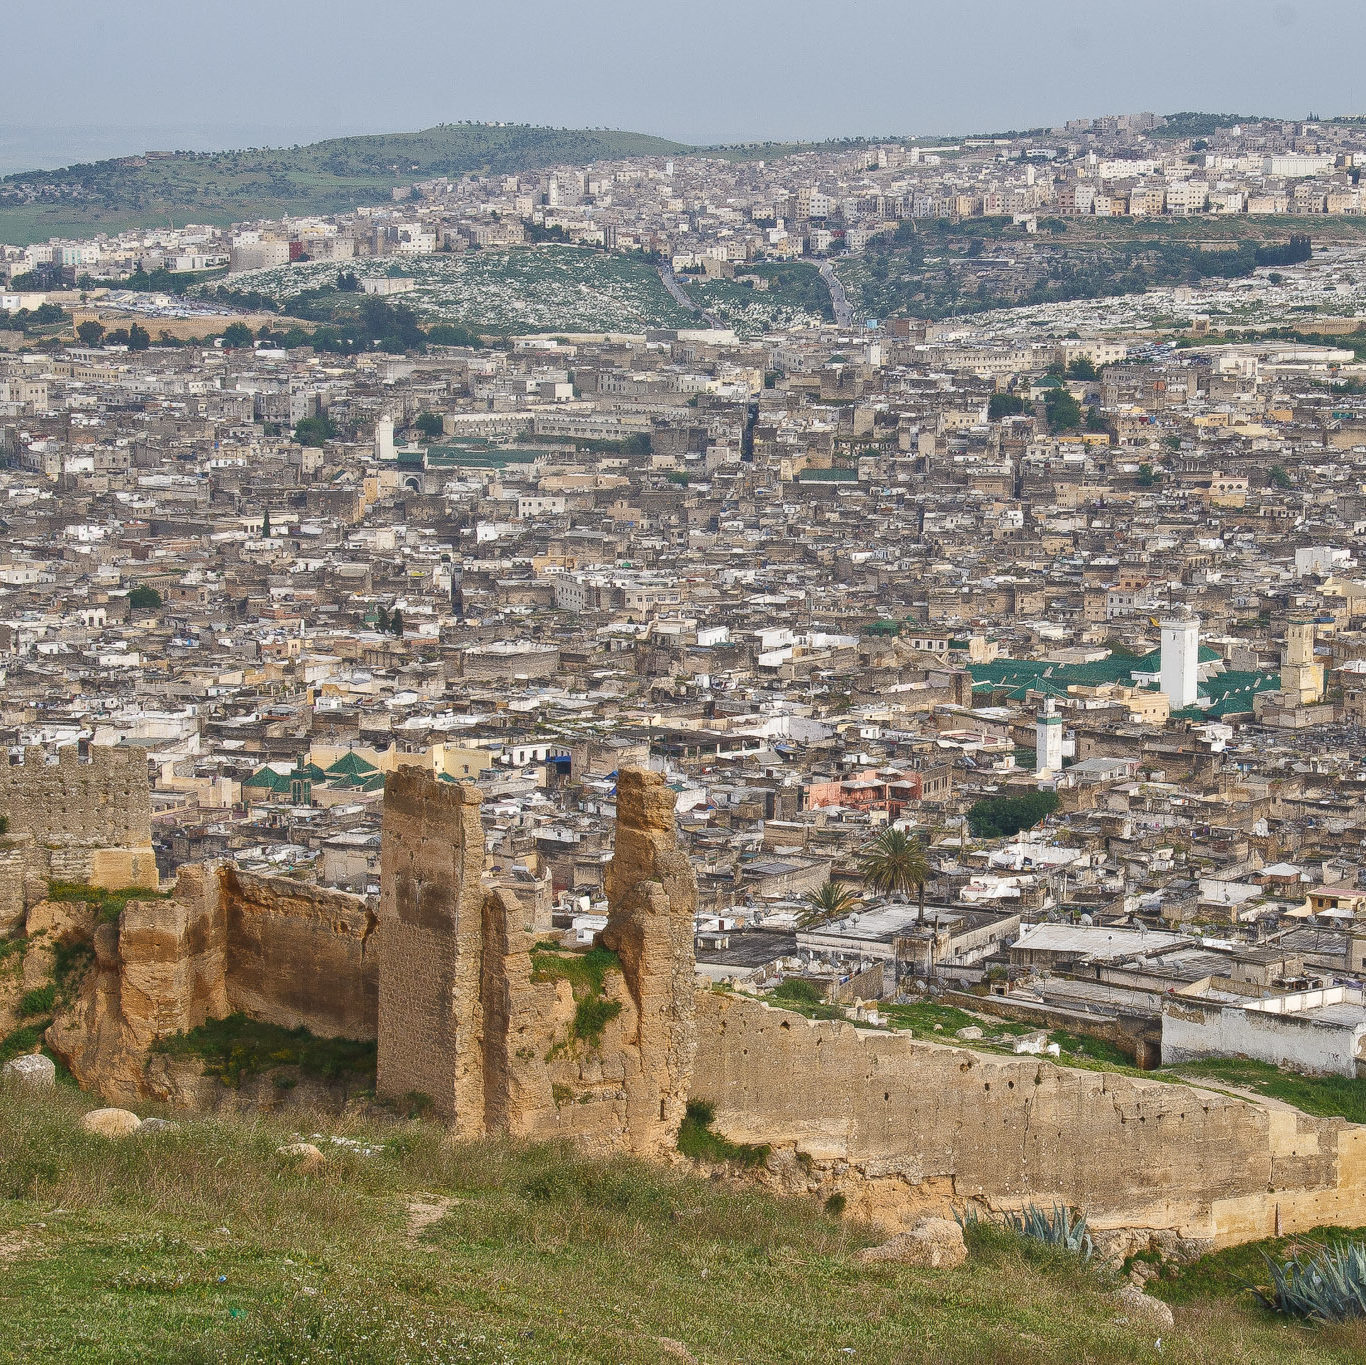 Merenid Tombs and view of Fez